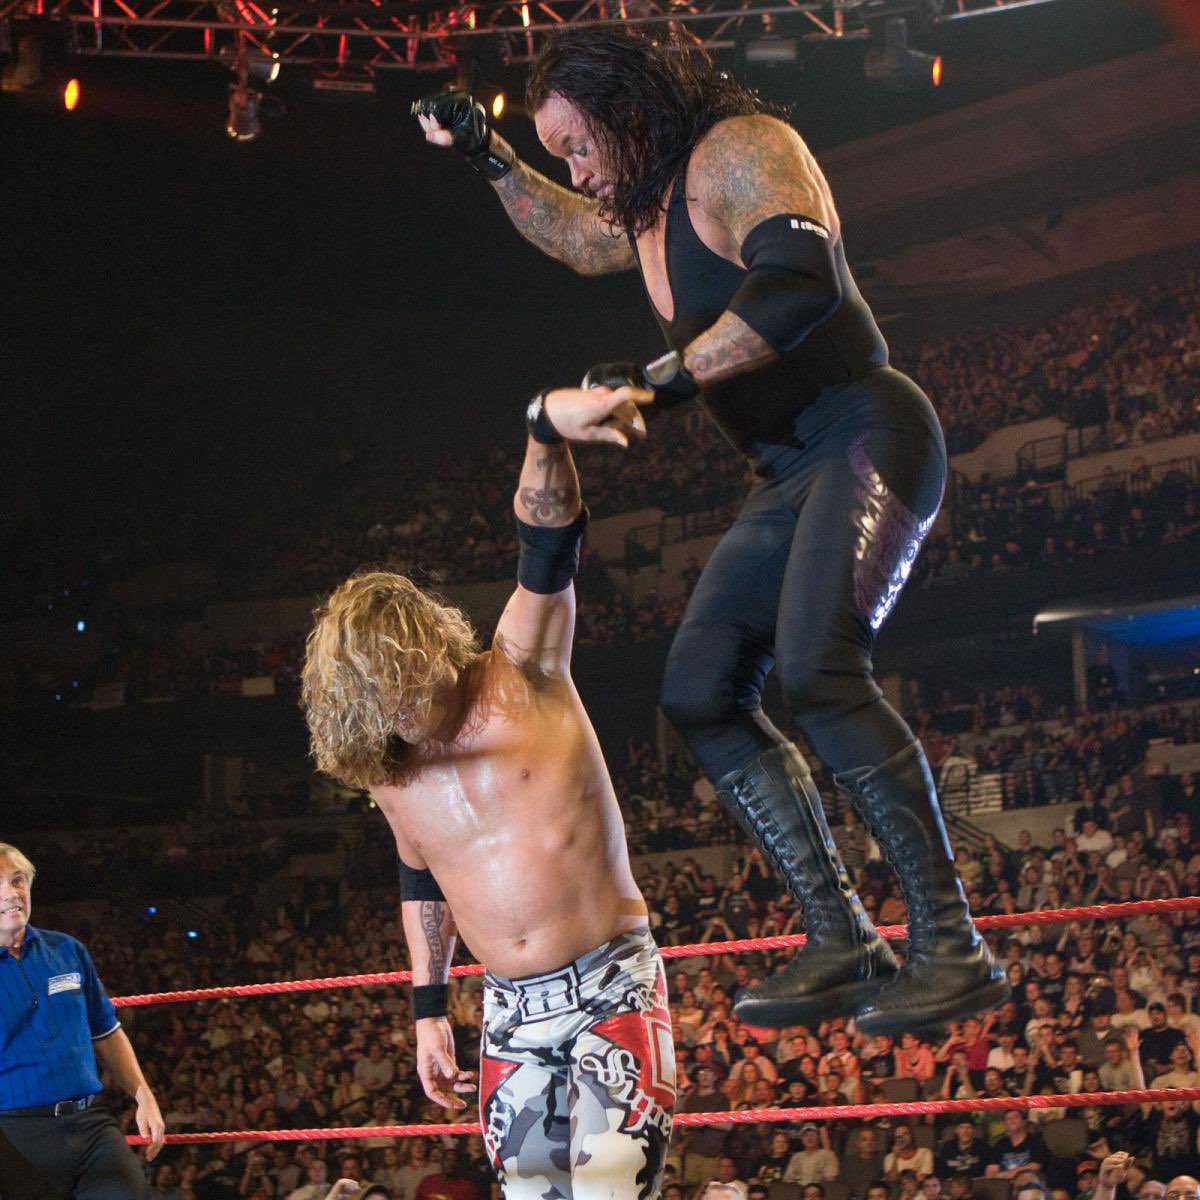 16 Years Ago Today At Judgement Day 2008 @undertaker Faced Off With @RatedRCope For The World Heavyweight Championship